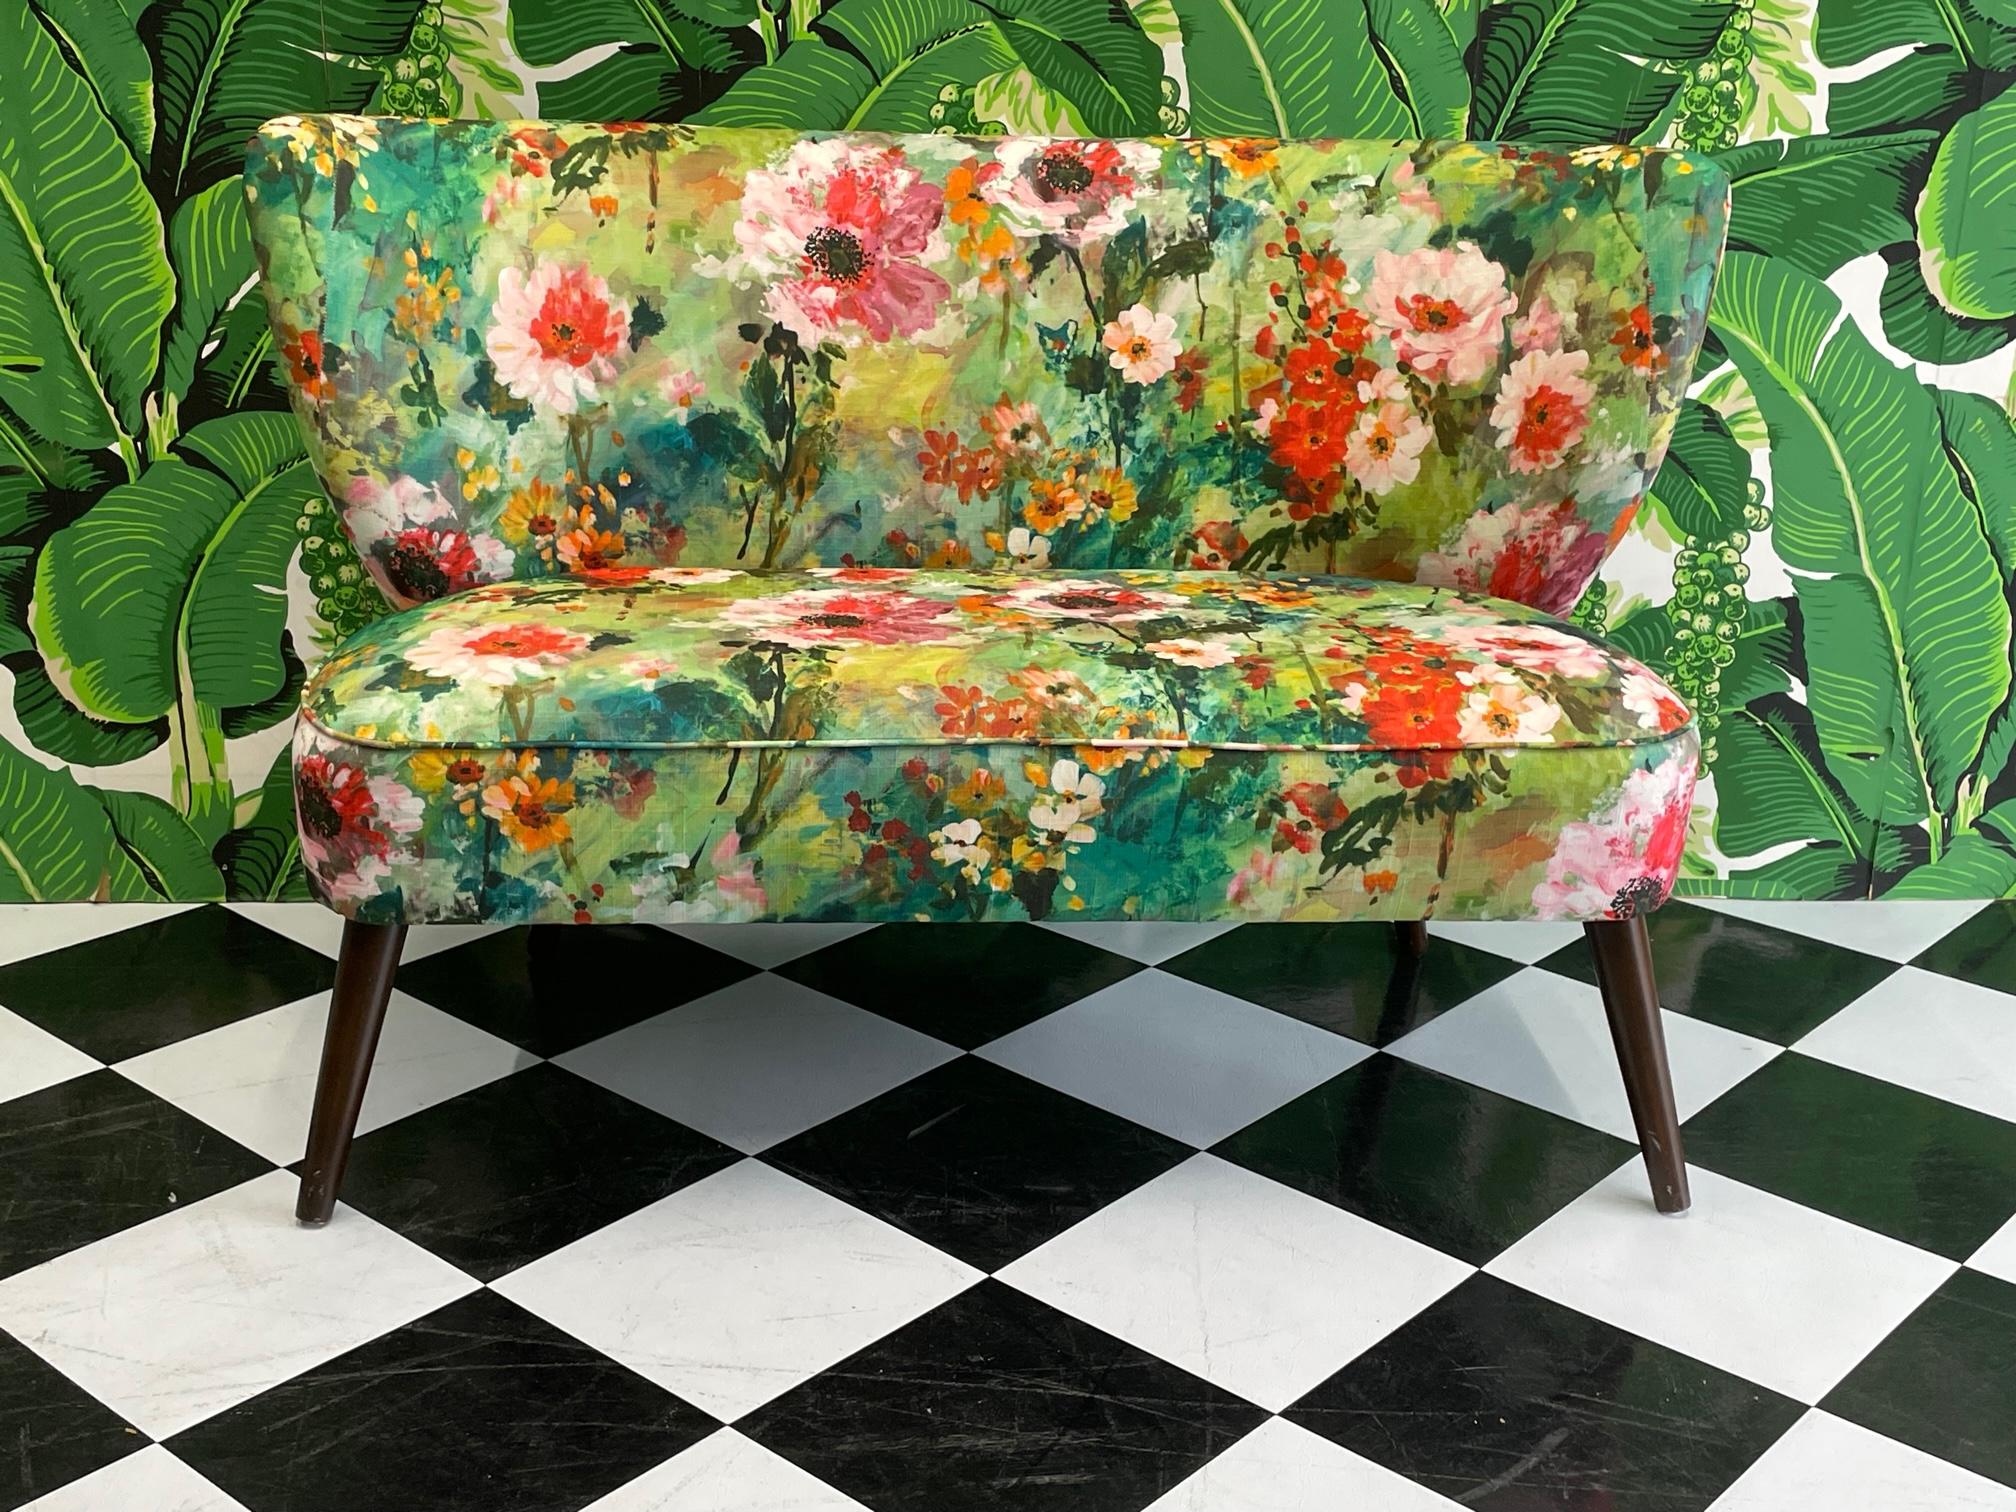 Mid century style settee features a bright floral upholstery and splayed tapered legs. Good condition with minor imperfections consistent with age, see photos for condition details.
For a shipping quote to your exact zip code, please message us.
